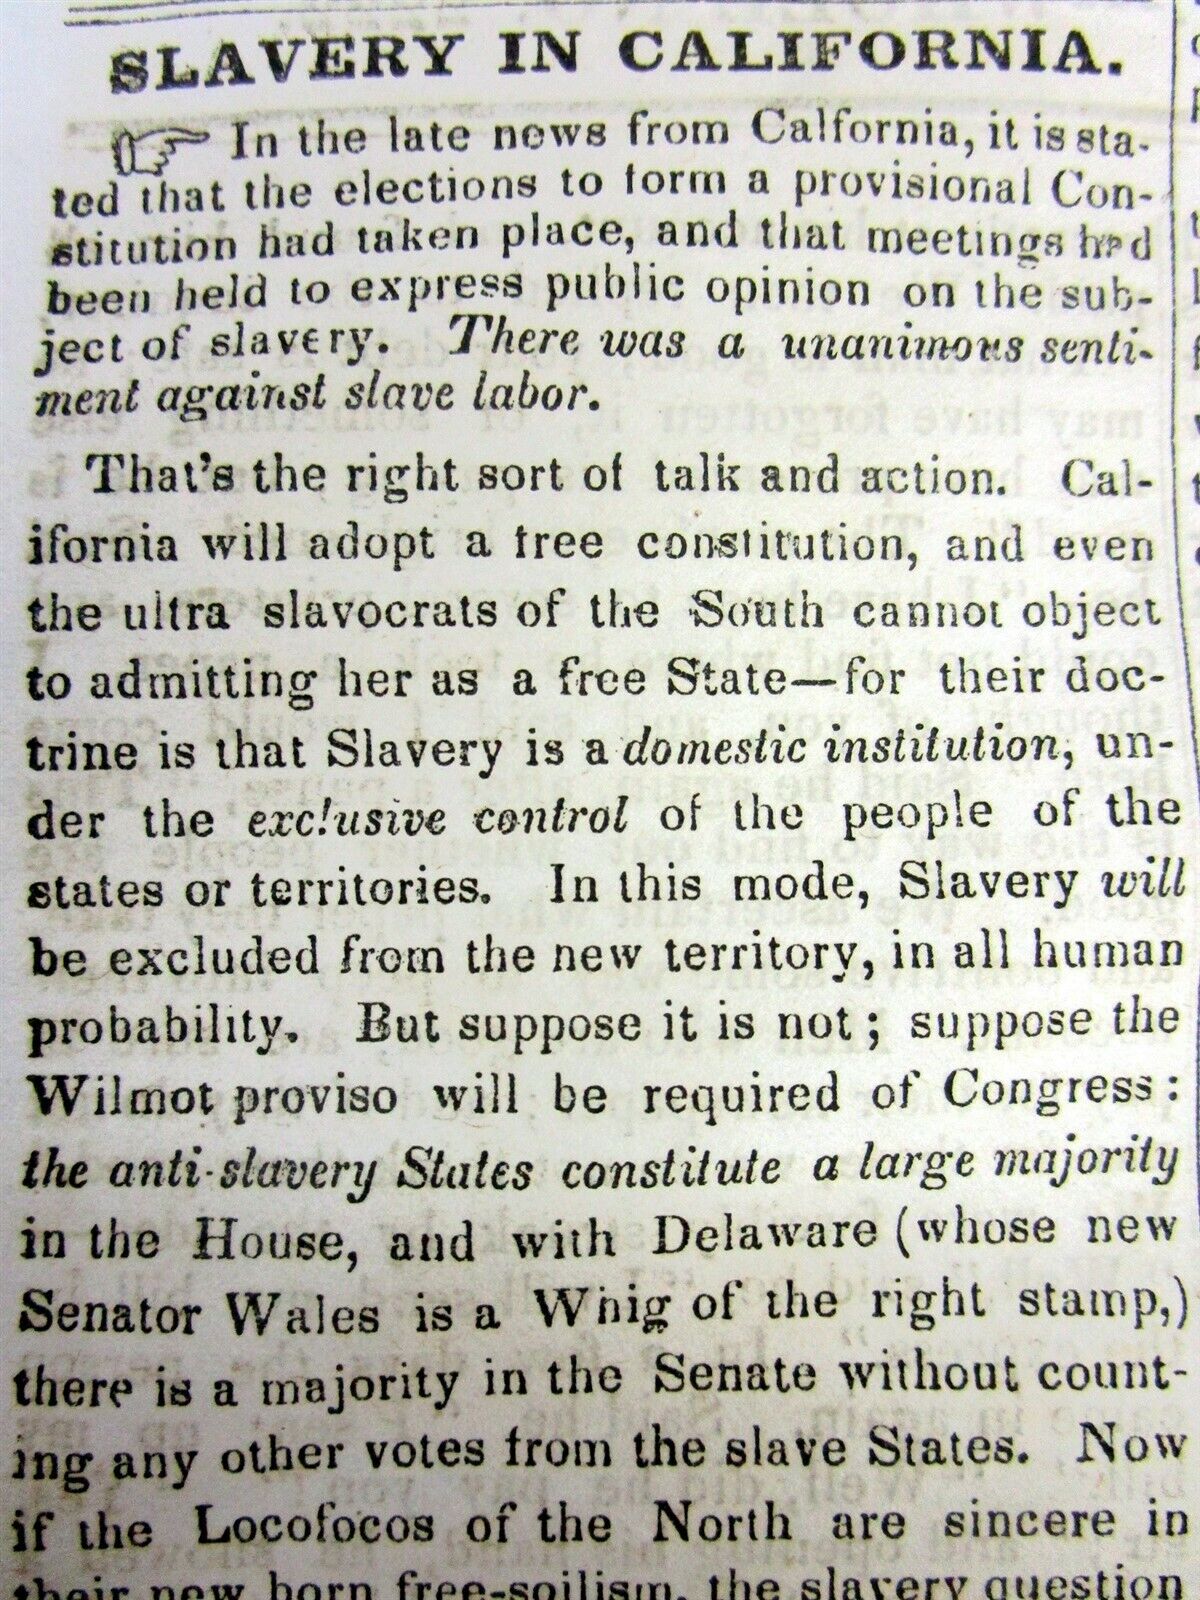 1849 newspaper BANNING of SLAVERY in CALIFORNIA at the time of the GOLD RUSH